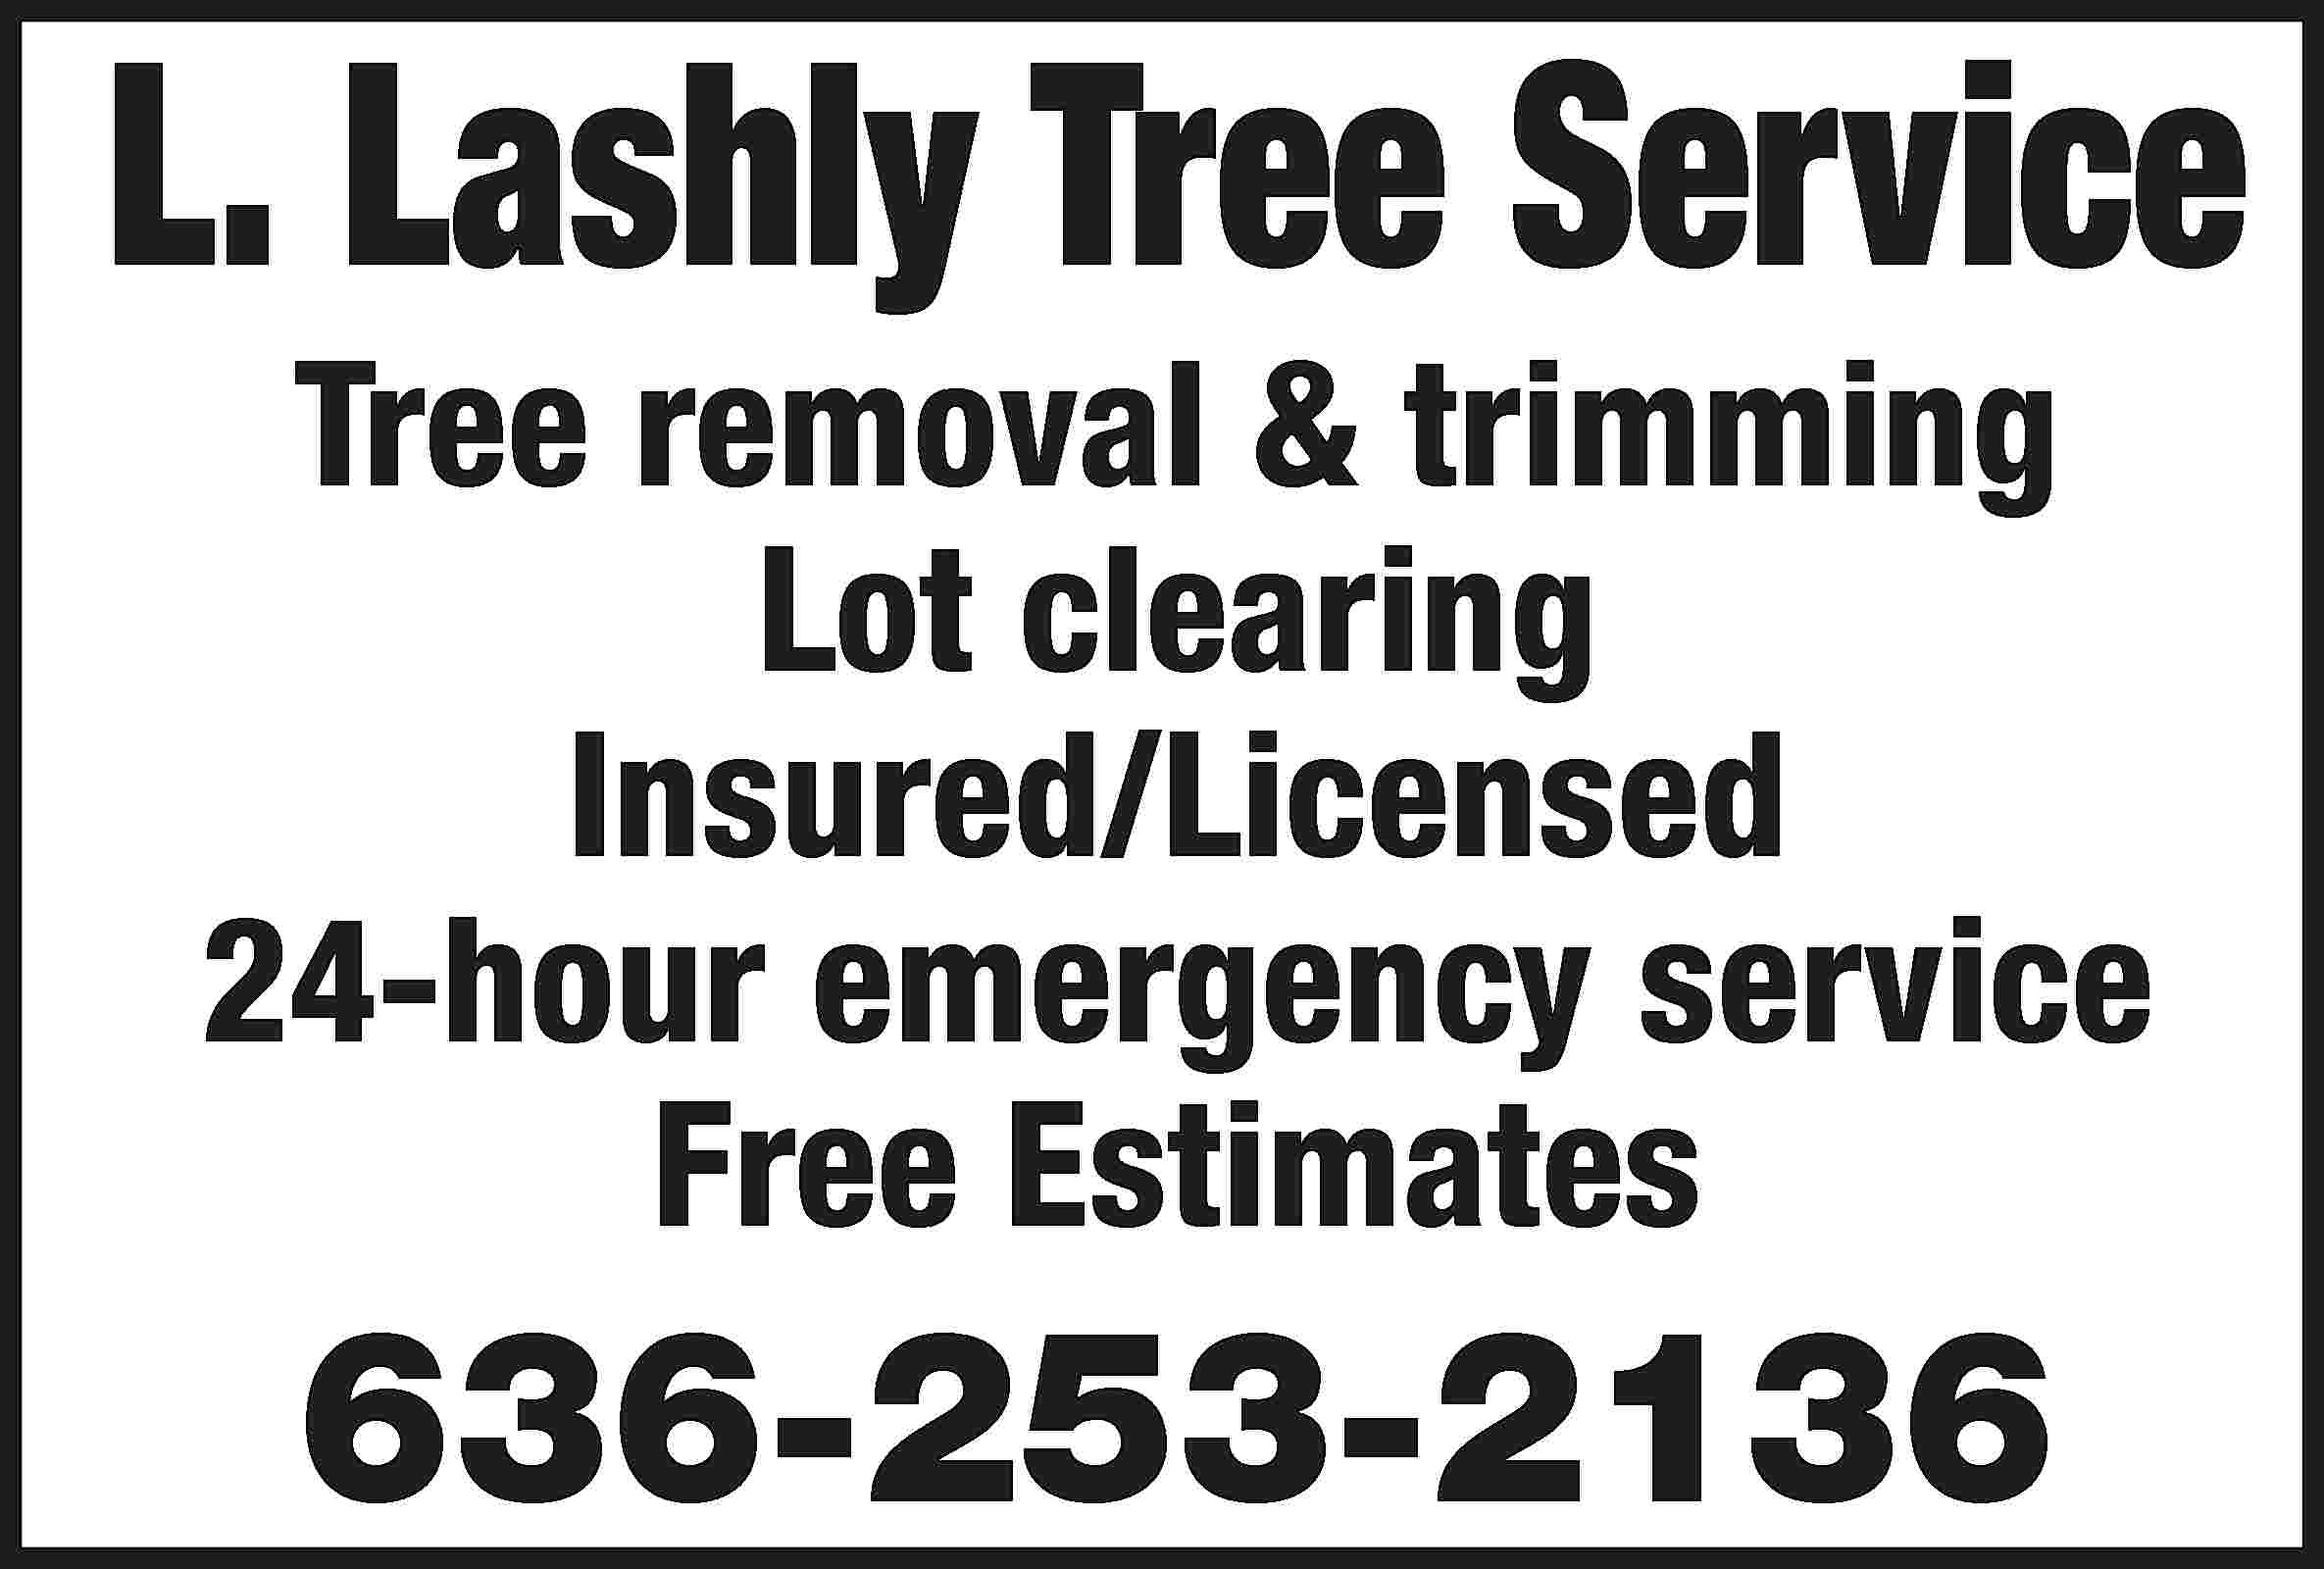 L. Lashly Tree Service Tree  L. Lashly Tree Service Tree removal & trimming Lot clearing Insured/Licensed 24-hour emergency service Free Estimates 636-253-2136